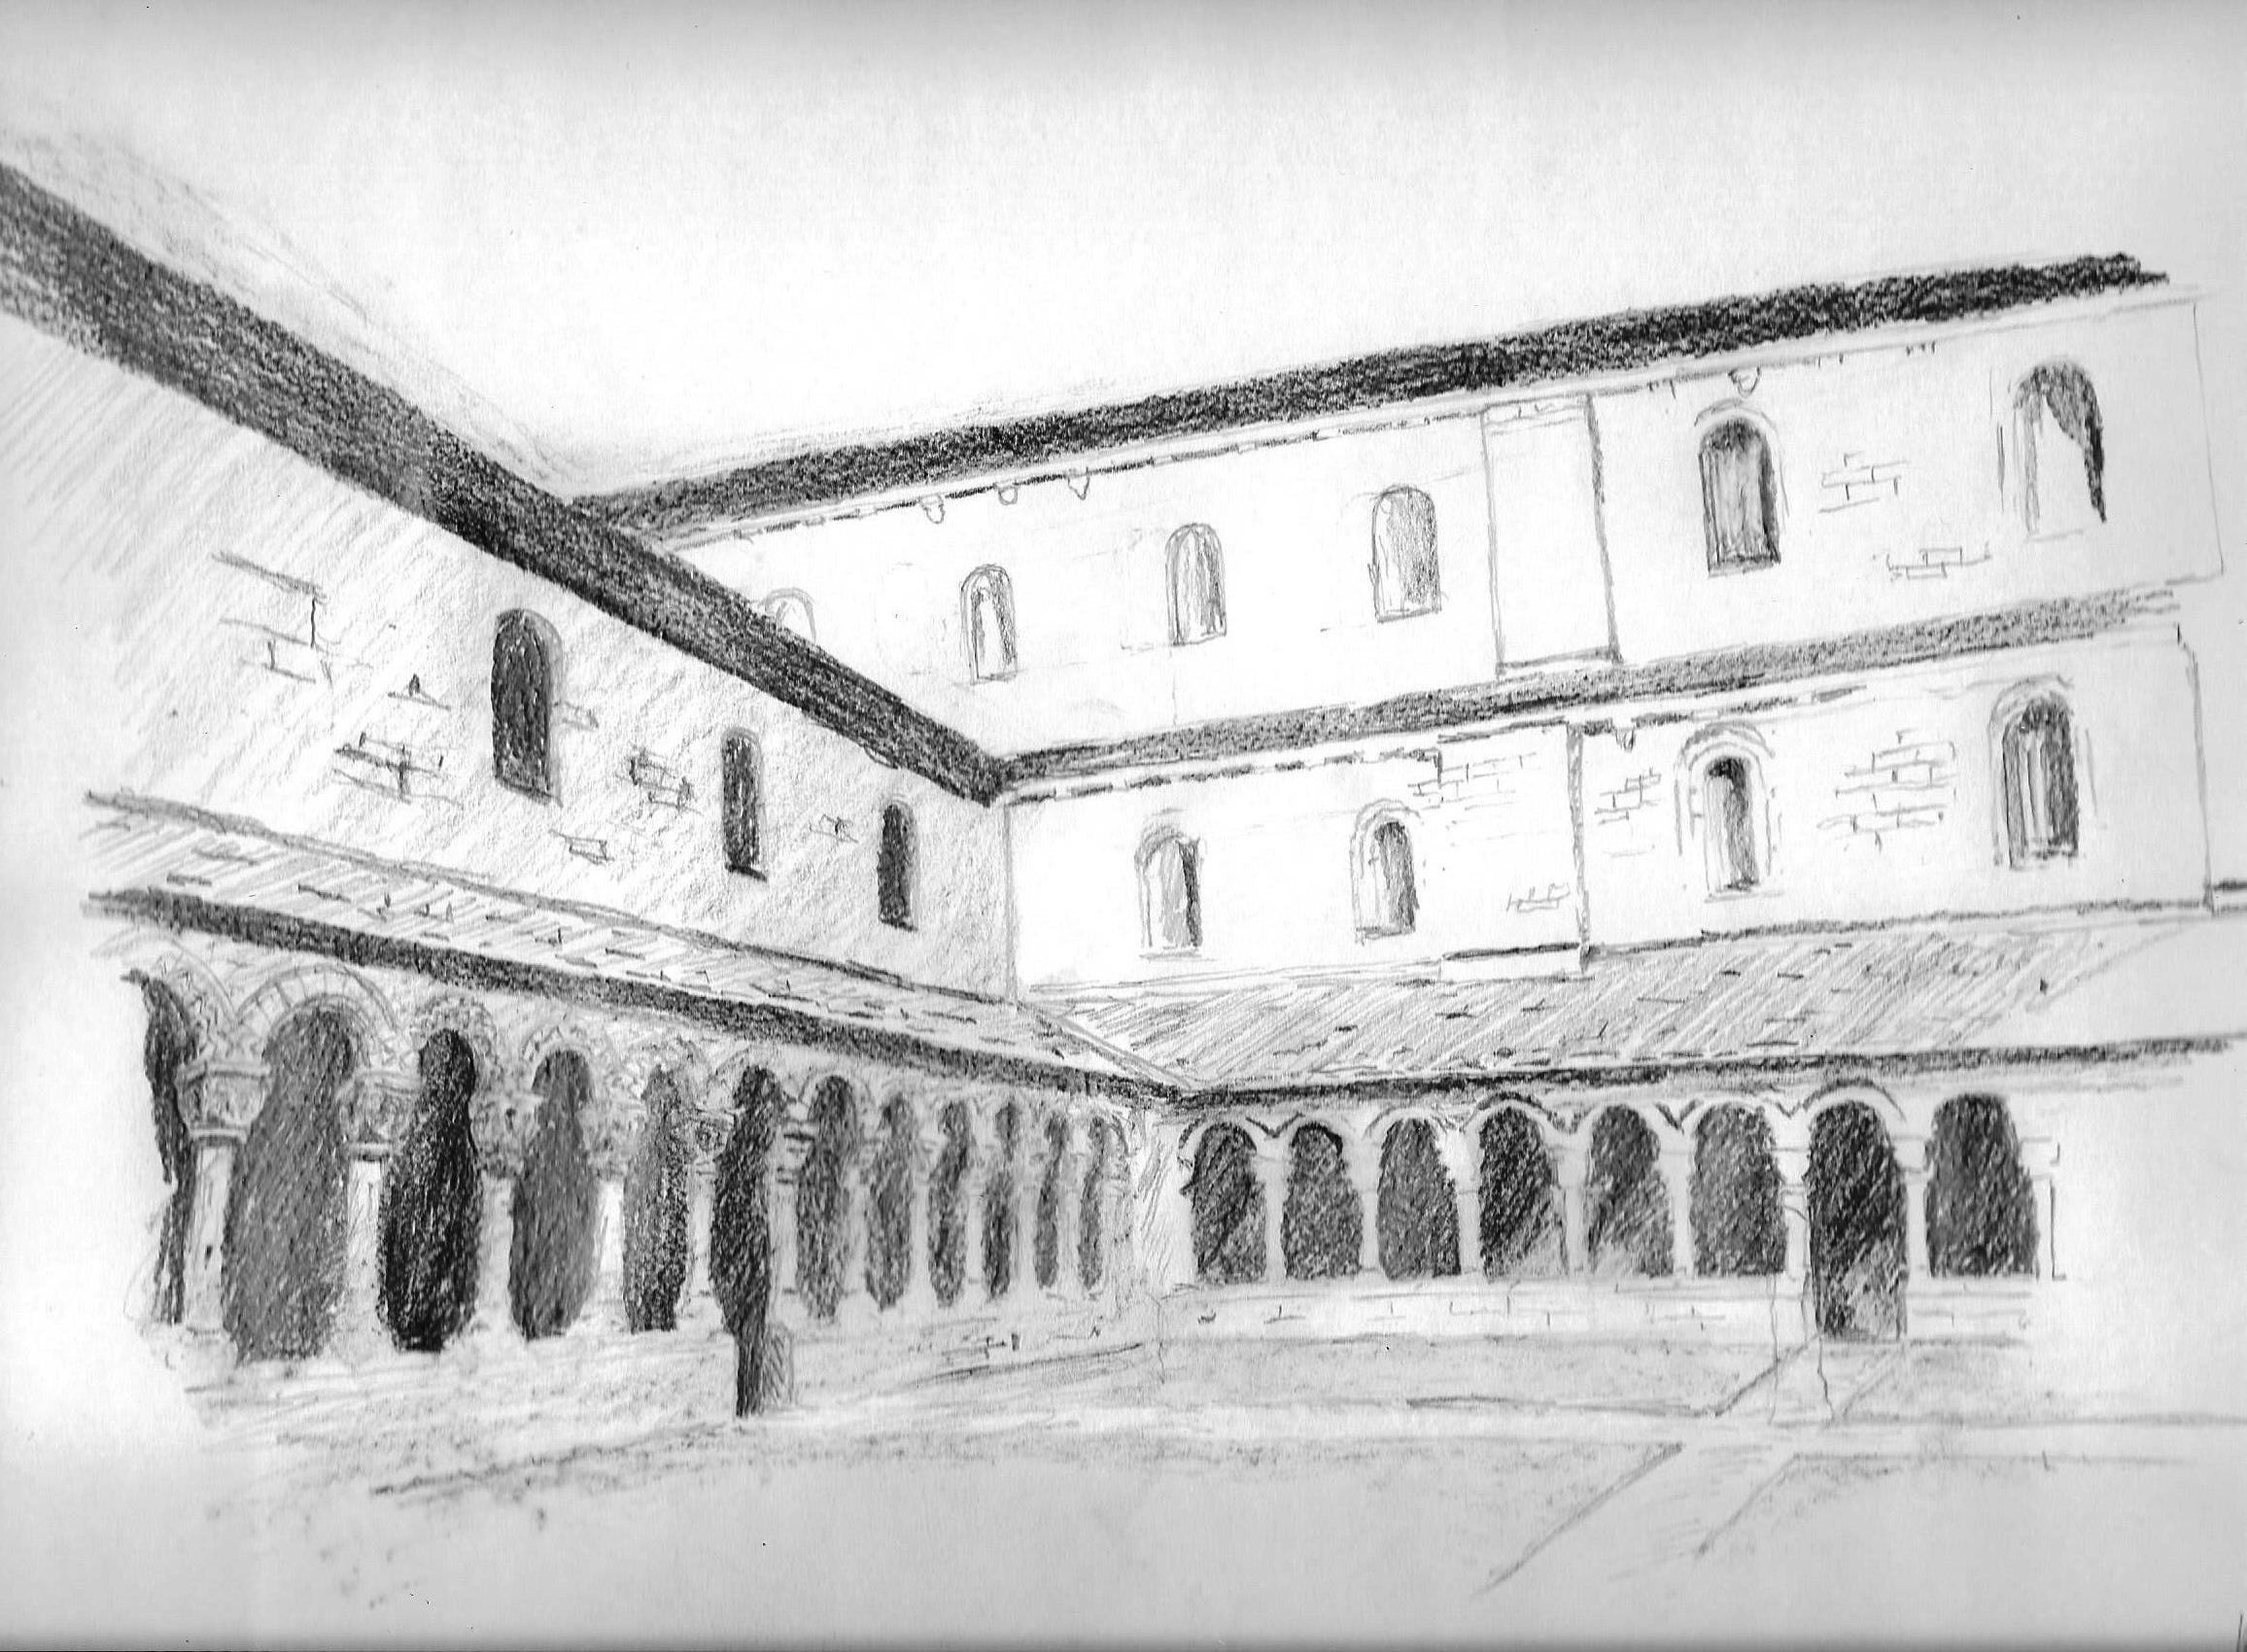  A sketch of the Hyde Abbey cloisters by Ross Lovett 